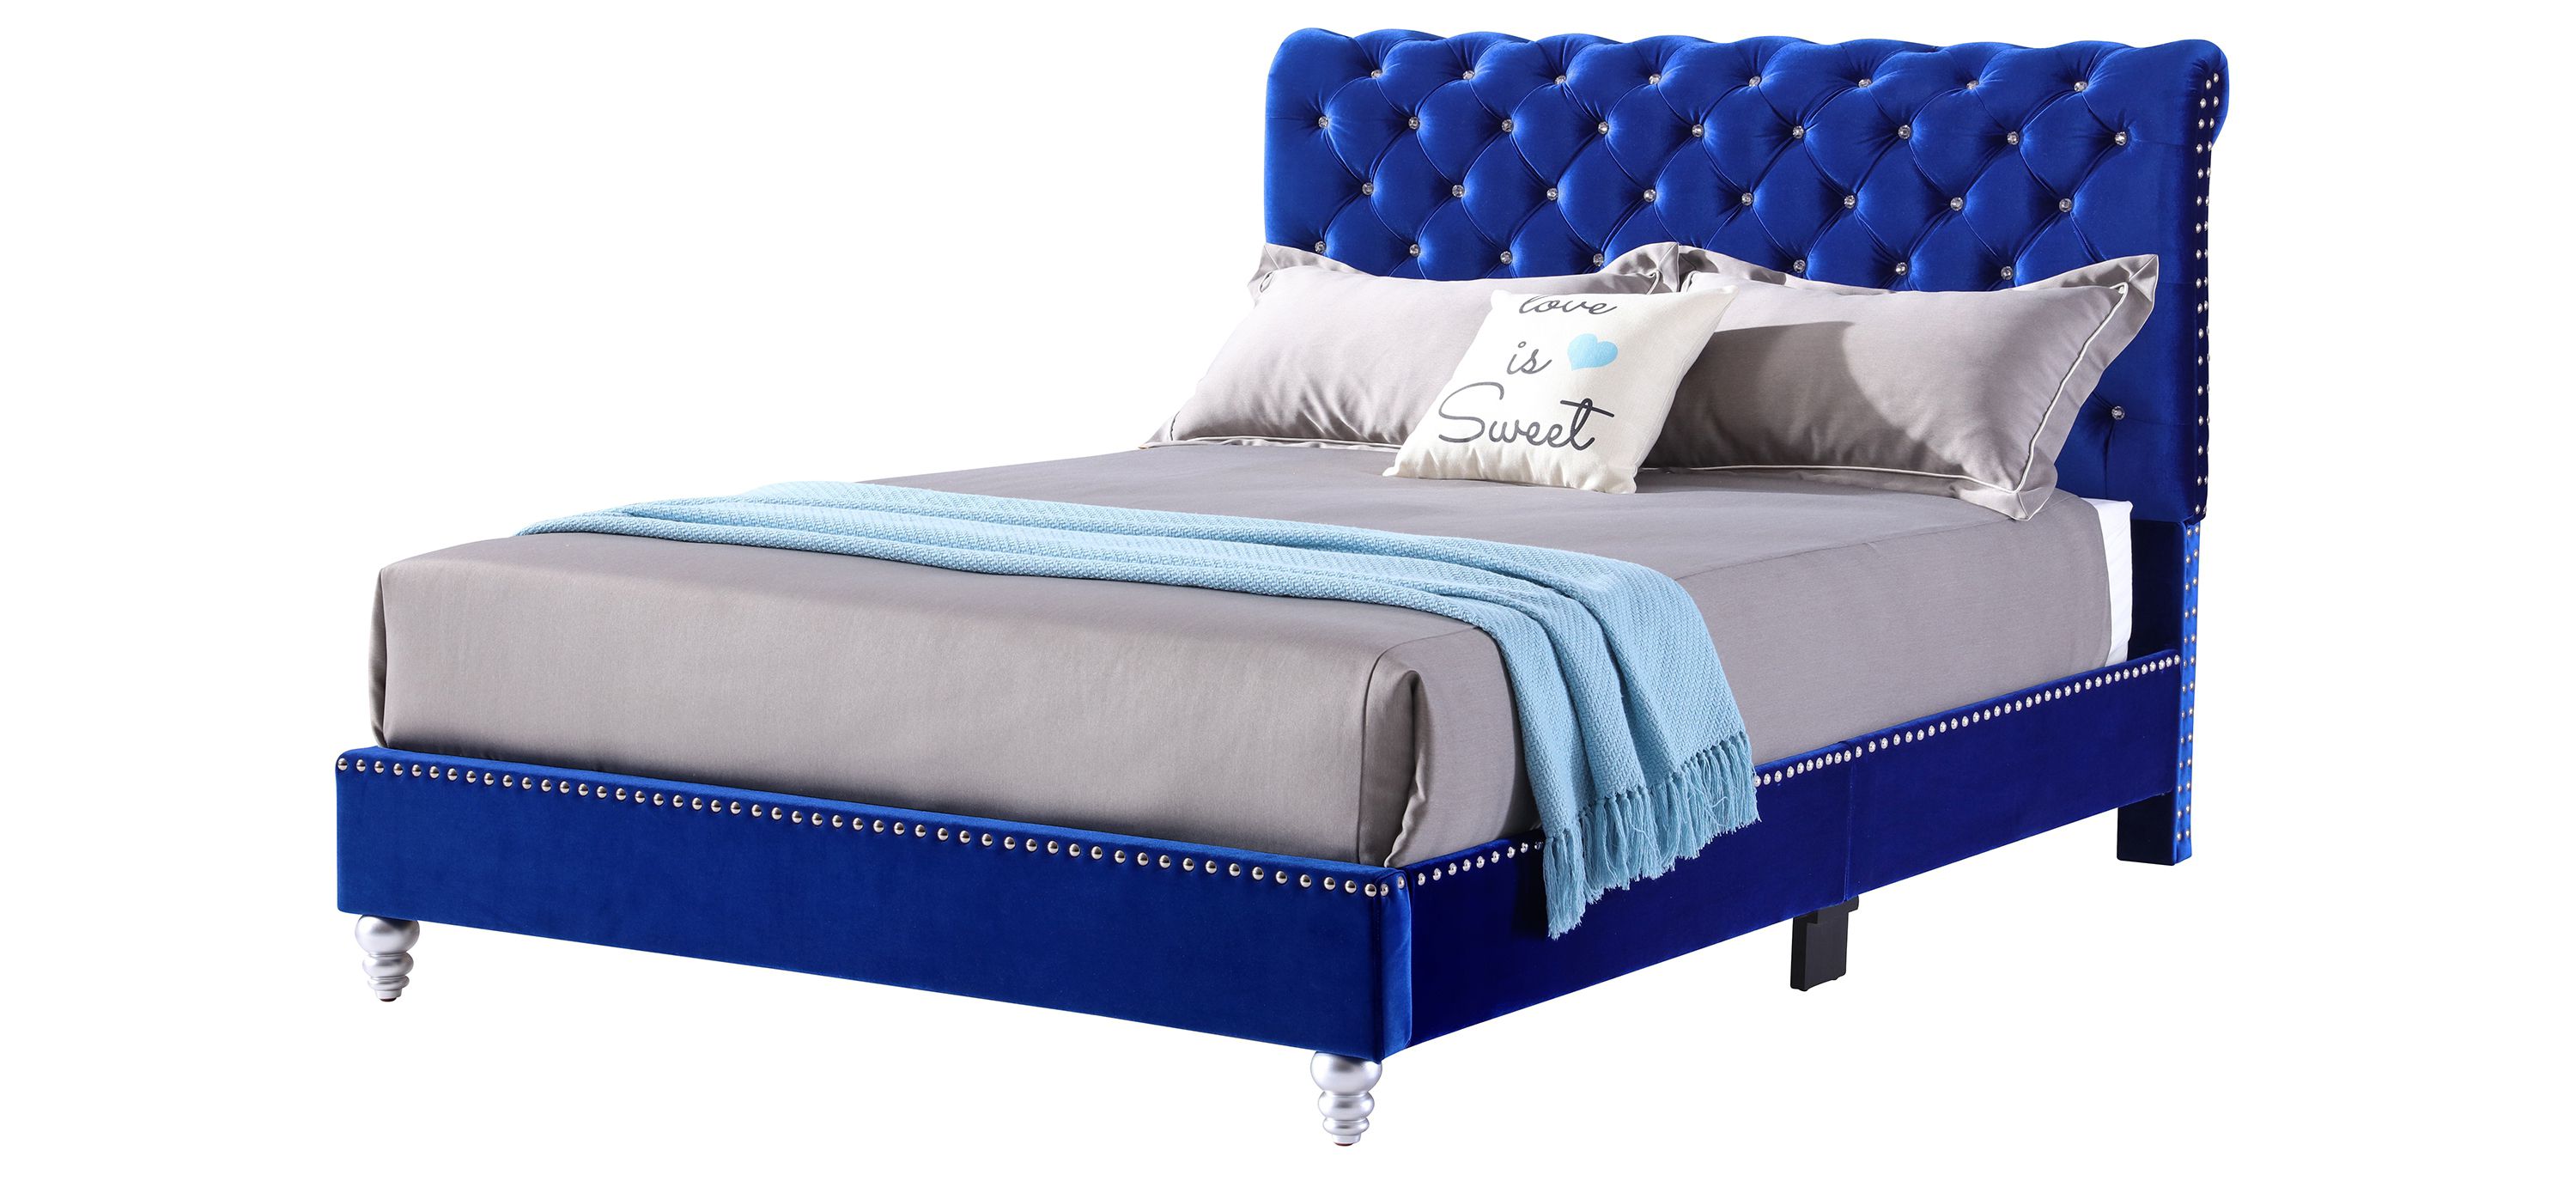 Maxx Upholstered Sleigh Bed